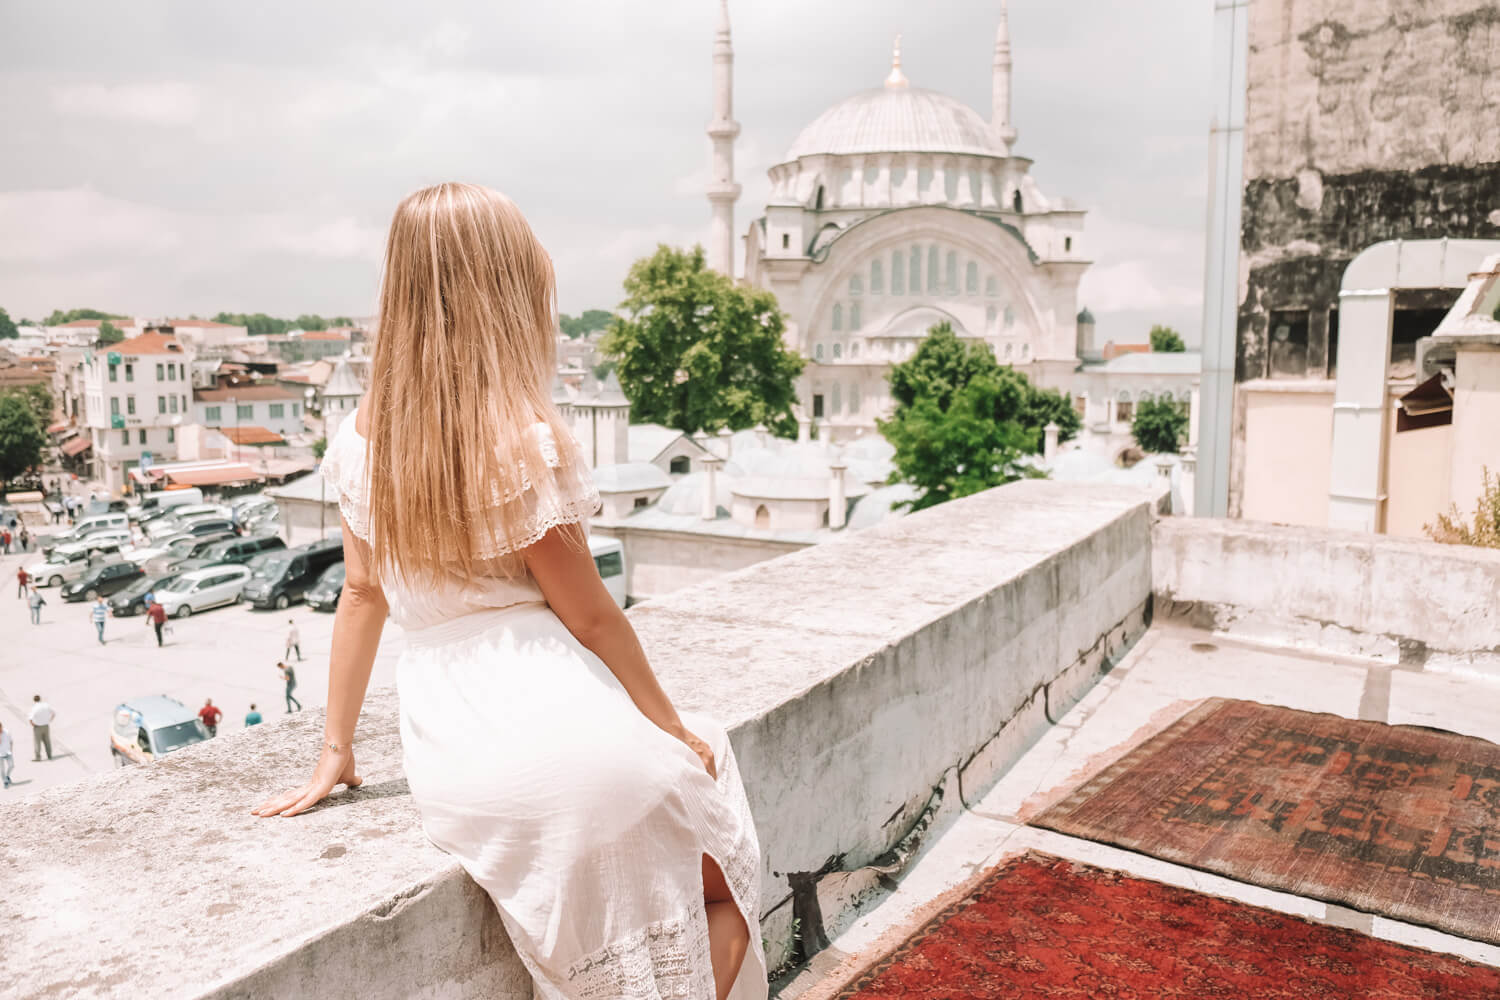 Looking over the mosque in Istanbul